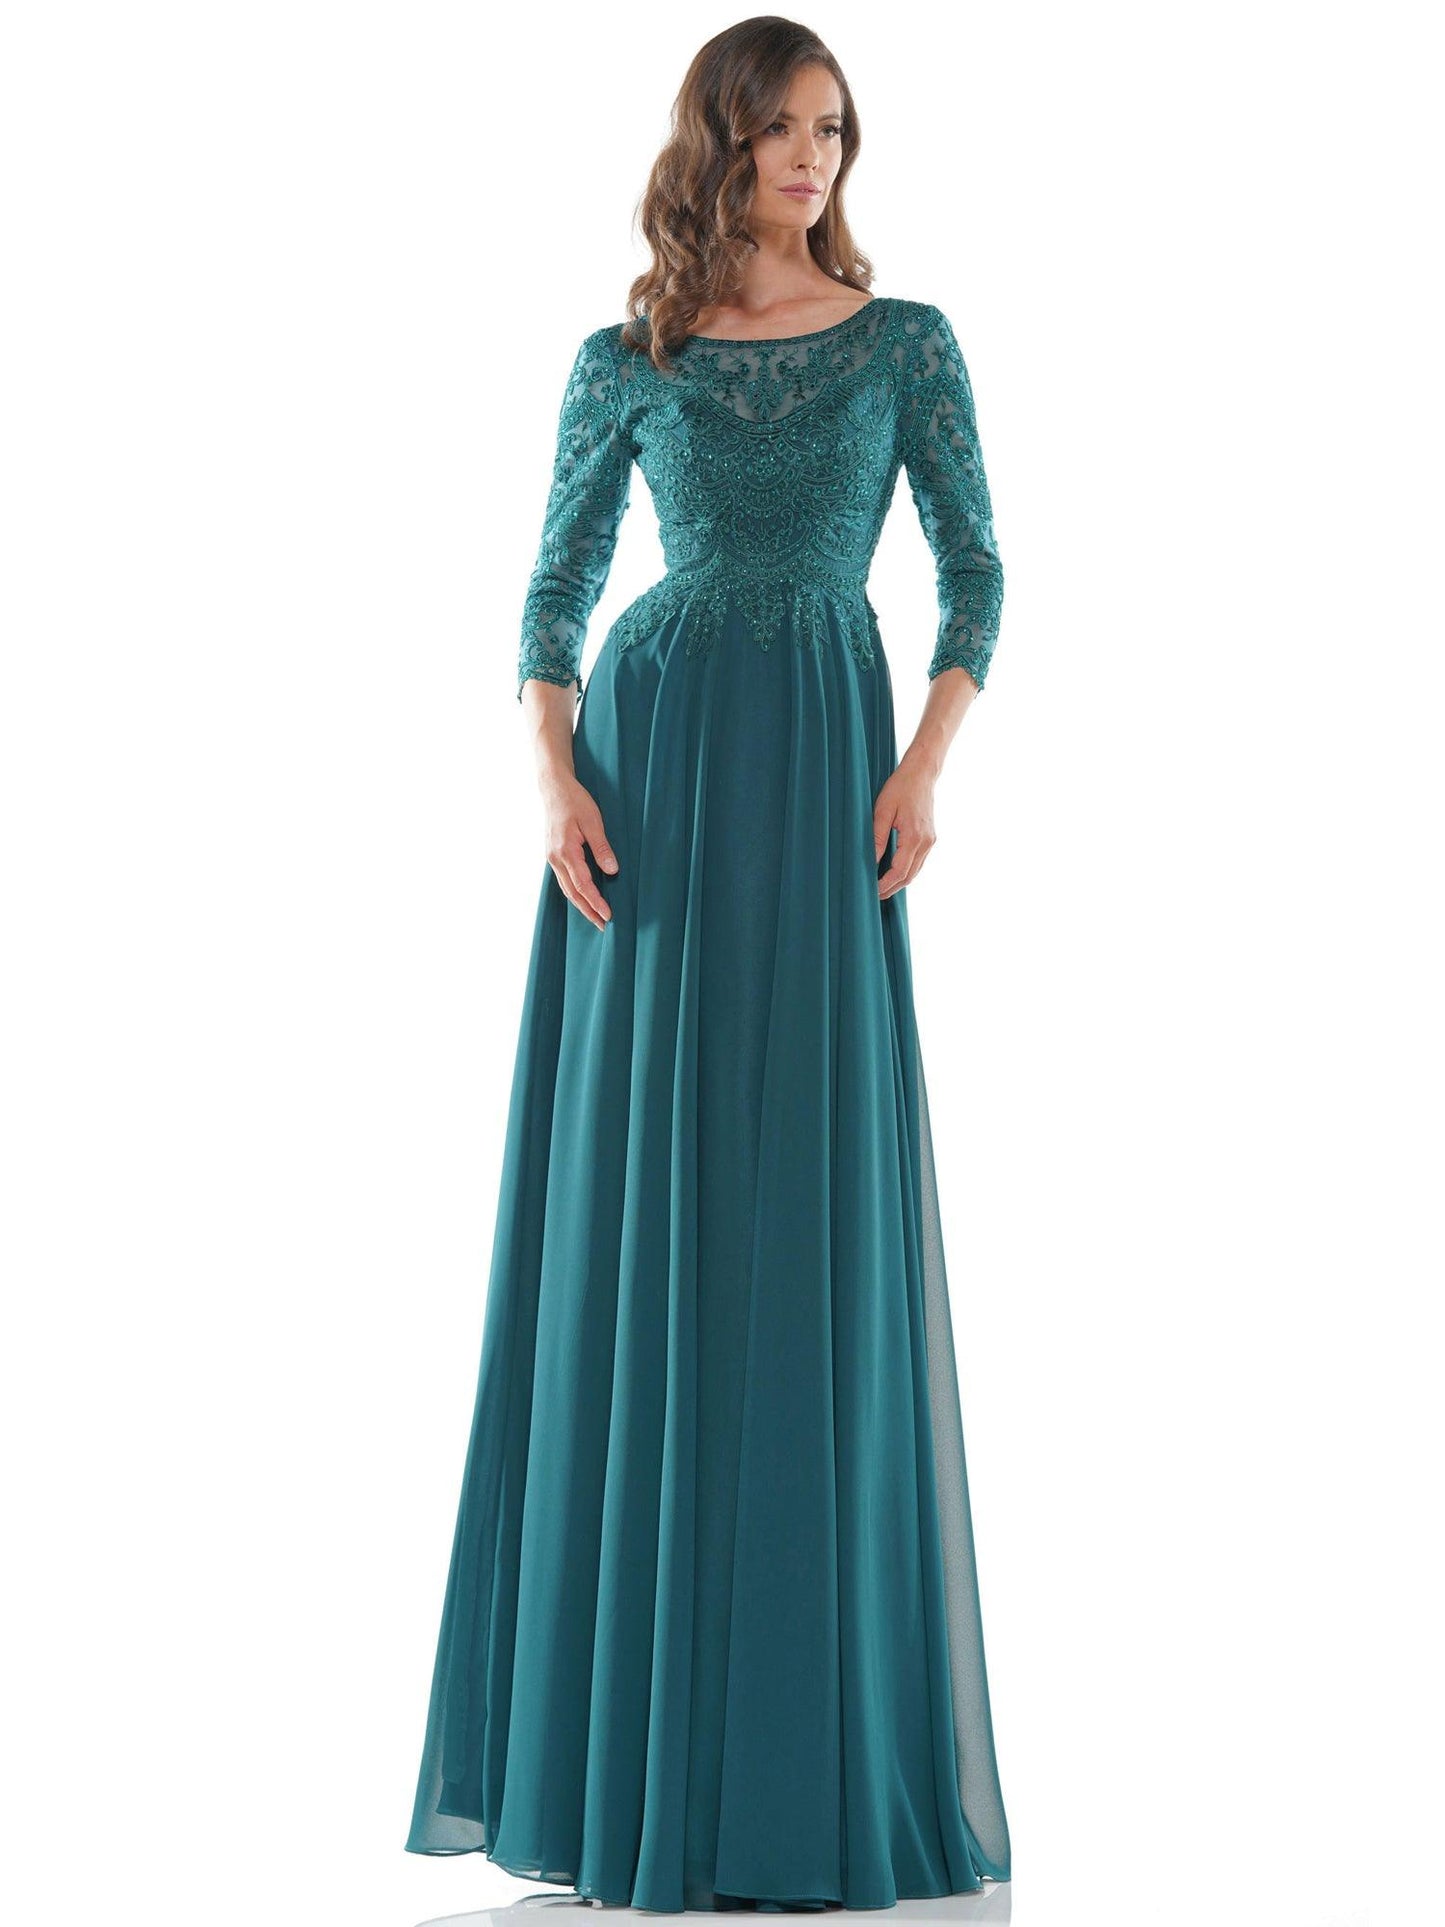 Marsoni Mother of the Bride Long Formal Dress 238SL - The Dress Outlet